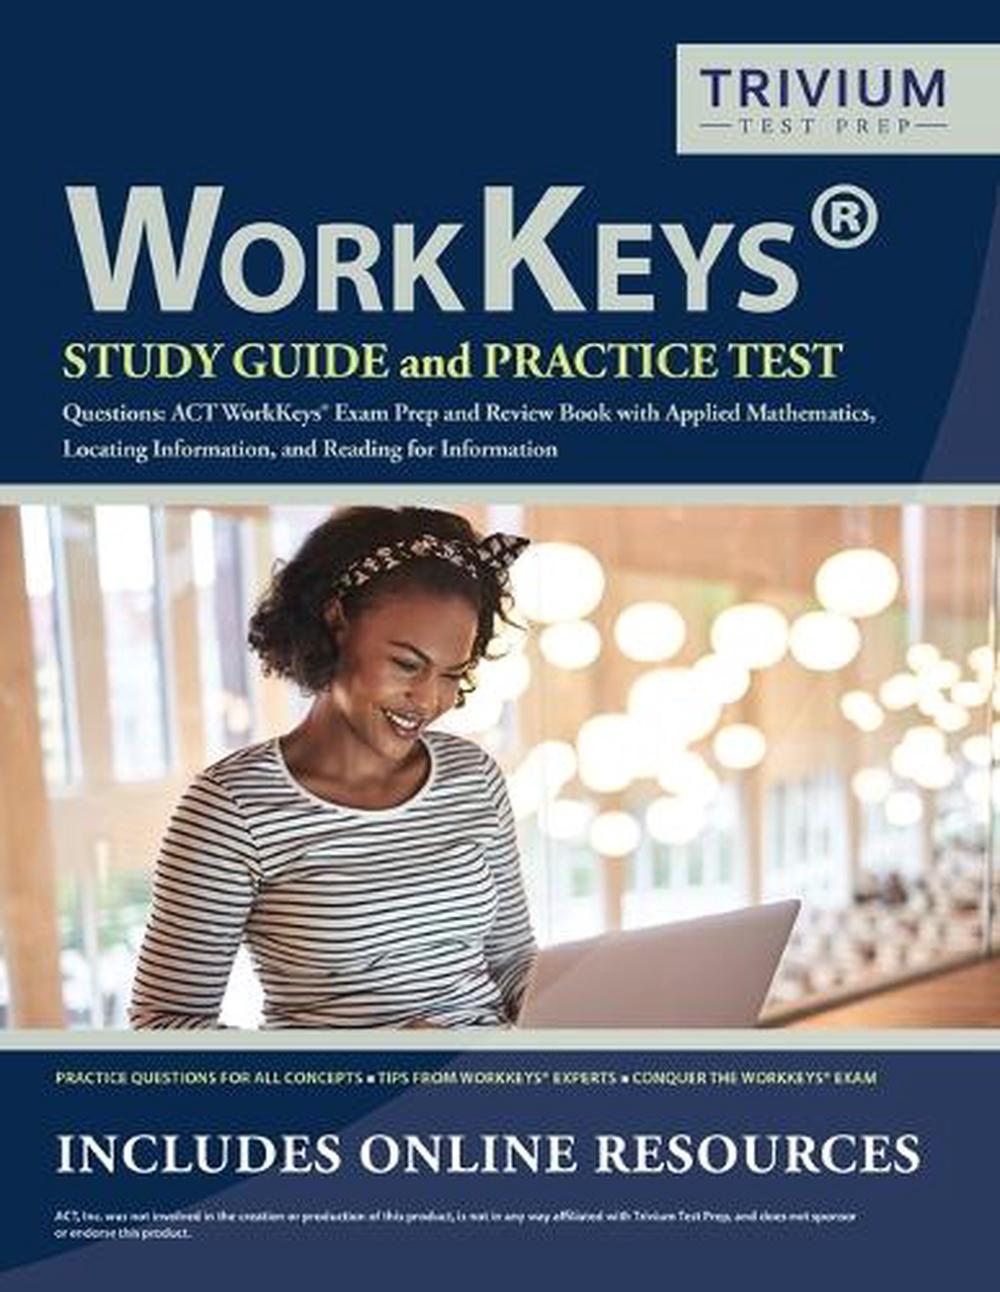 WorkKeys Study Guide and Practice Test Questions ACT WorkKeys Exam